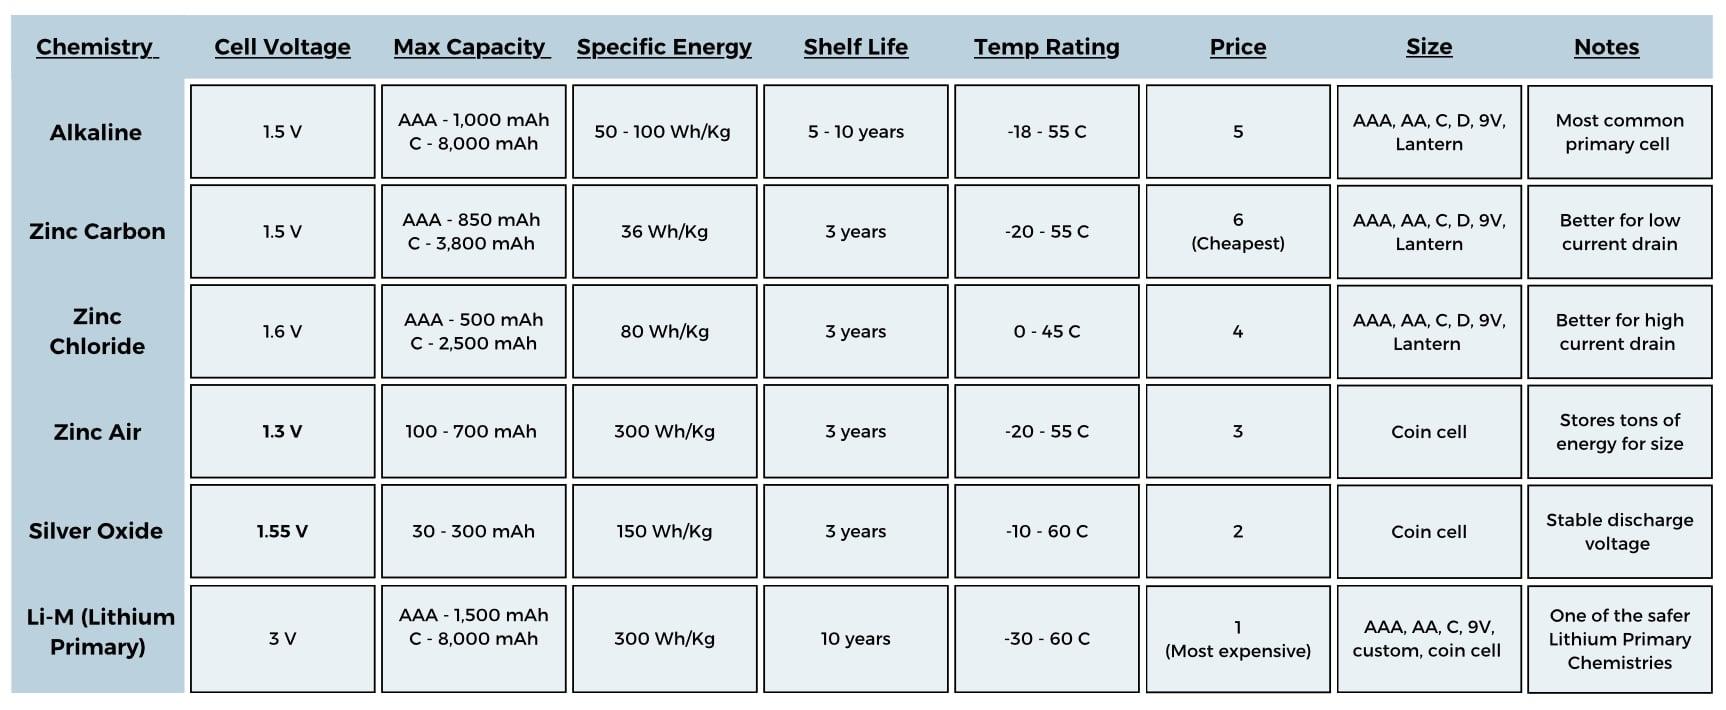 Table comparing top 6 primary battery chemistries including cell voltage, max capacity, specific energy, shelf life and more.